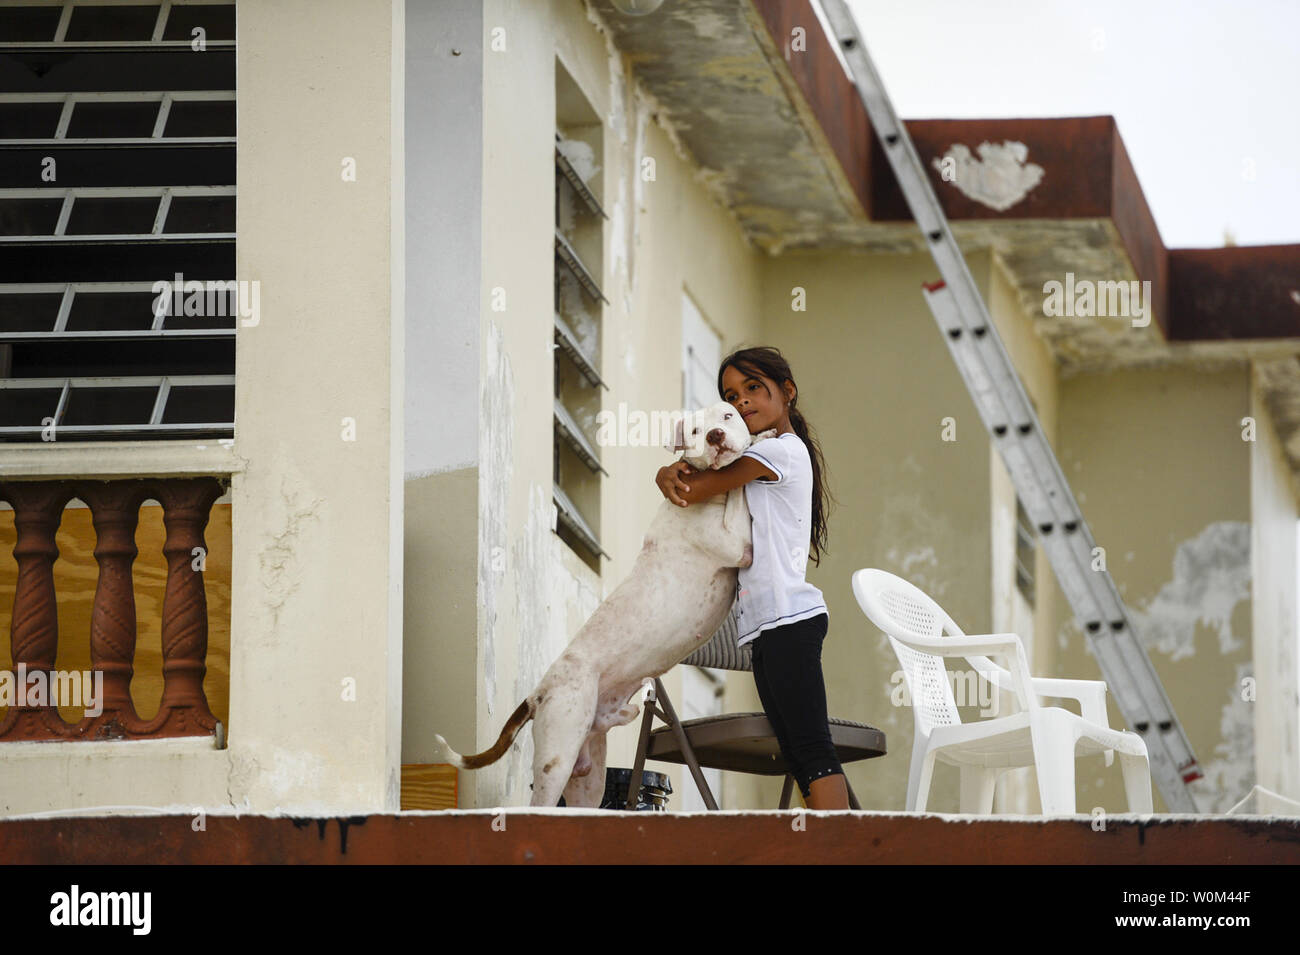 Fabiola Vazquez Barriel, 10, hugs her dog, Apollo, in San Juan, Puerto Rico, on October 3, 2017. The people of Puerto Rico are resilient, evidenced by the stories of neighbor helping neighbor, and communities helping communities after Hurricane Maria devastated the island. Photo by Master Sgt. Joshua DeMotts/U.S. Air Force/UPI Stock Photo